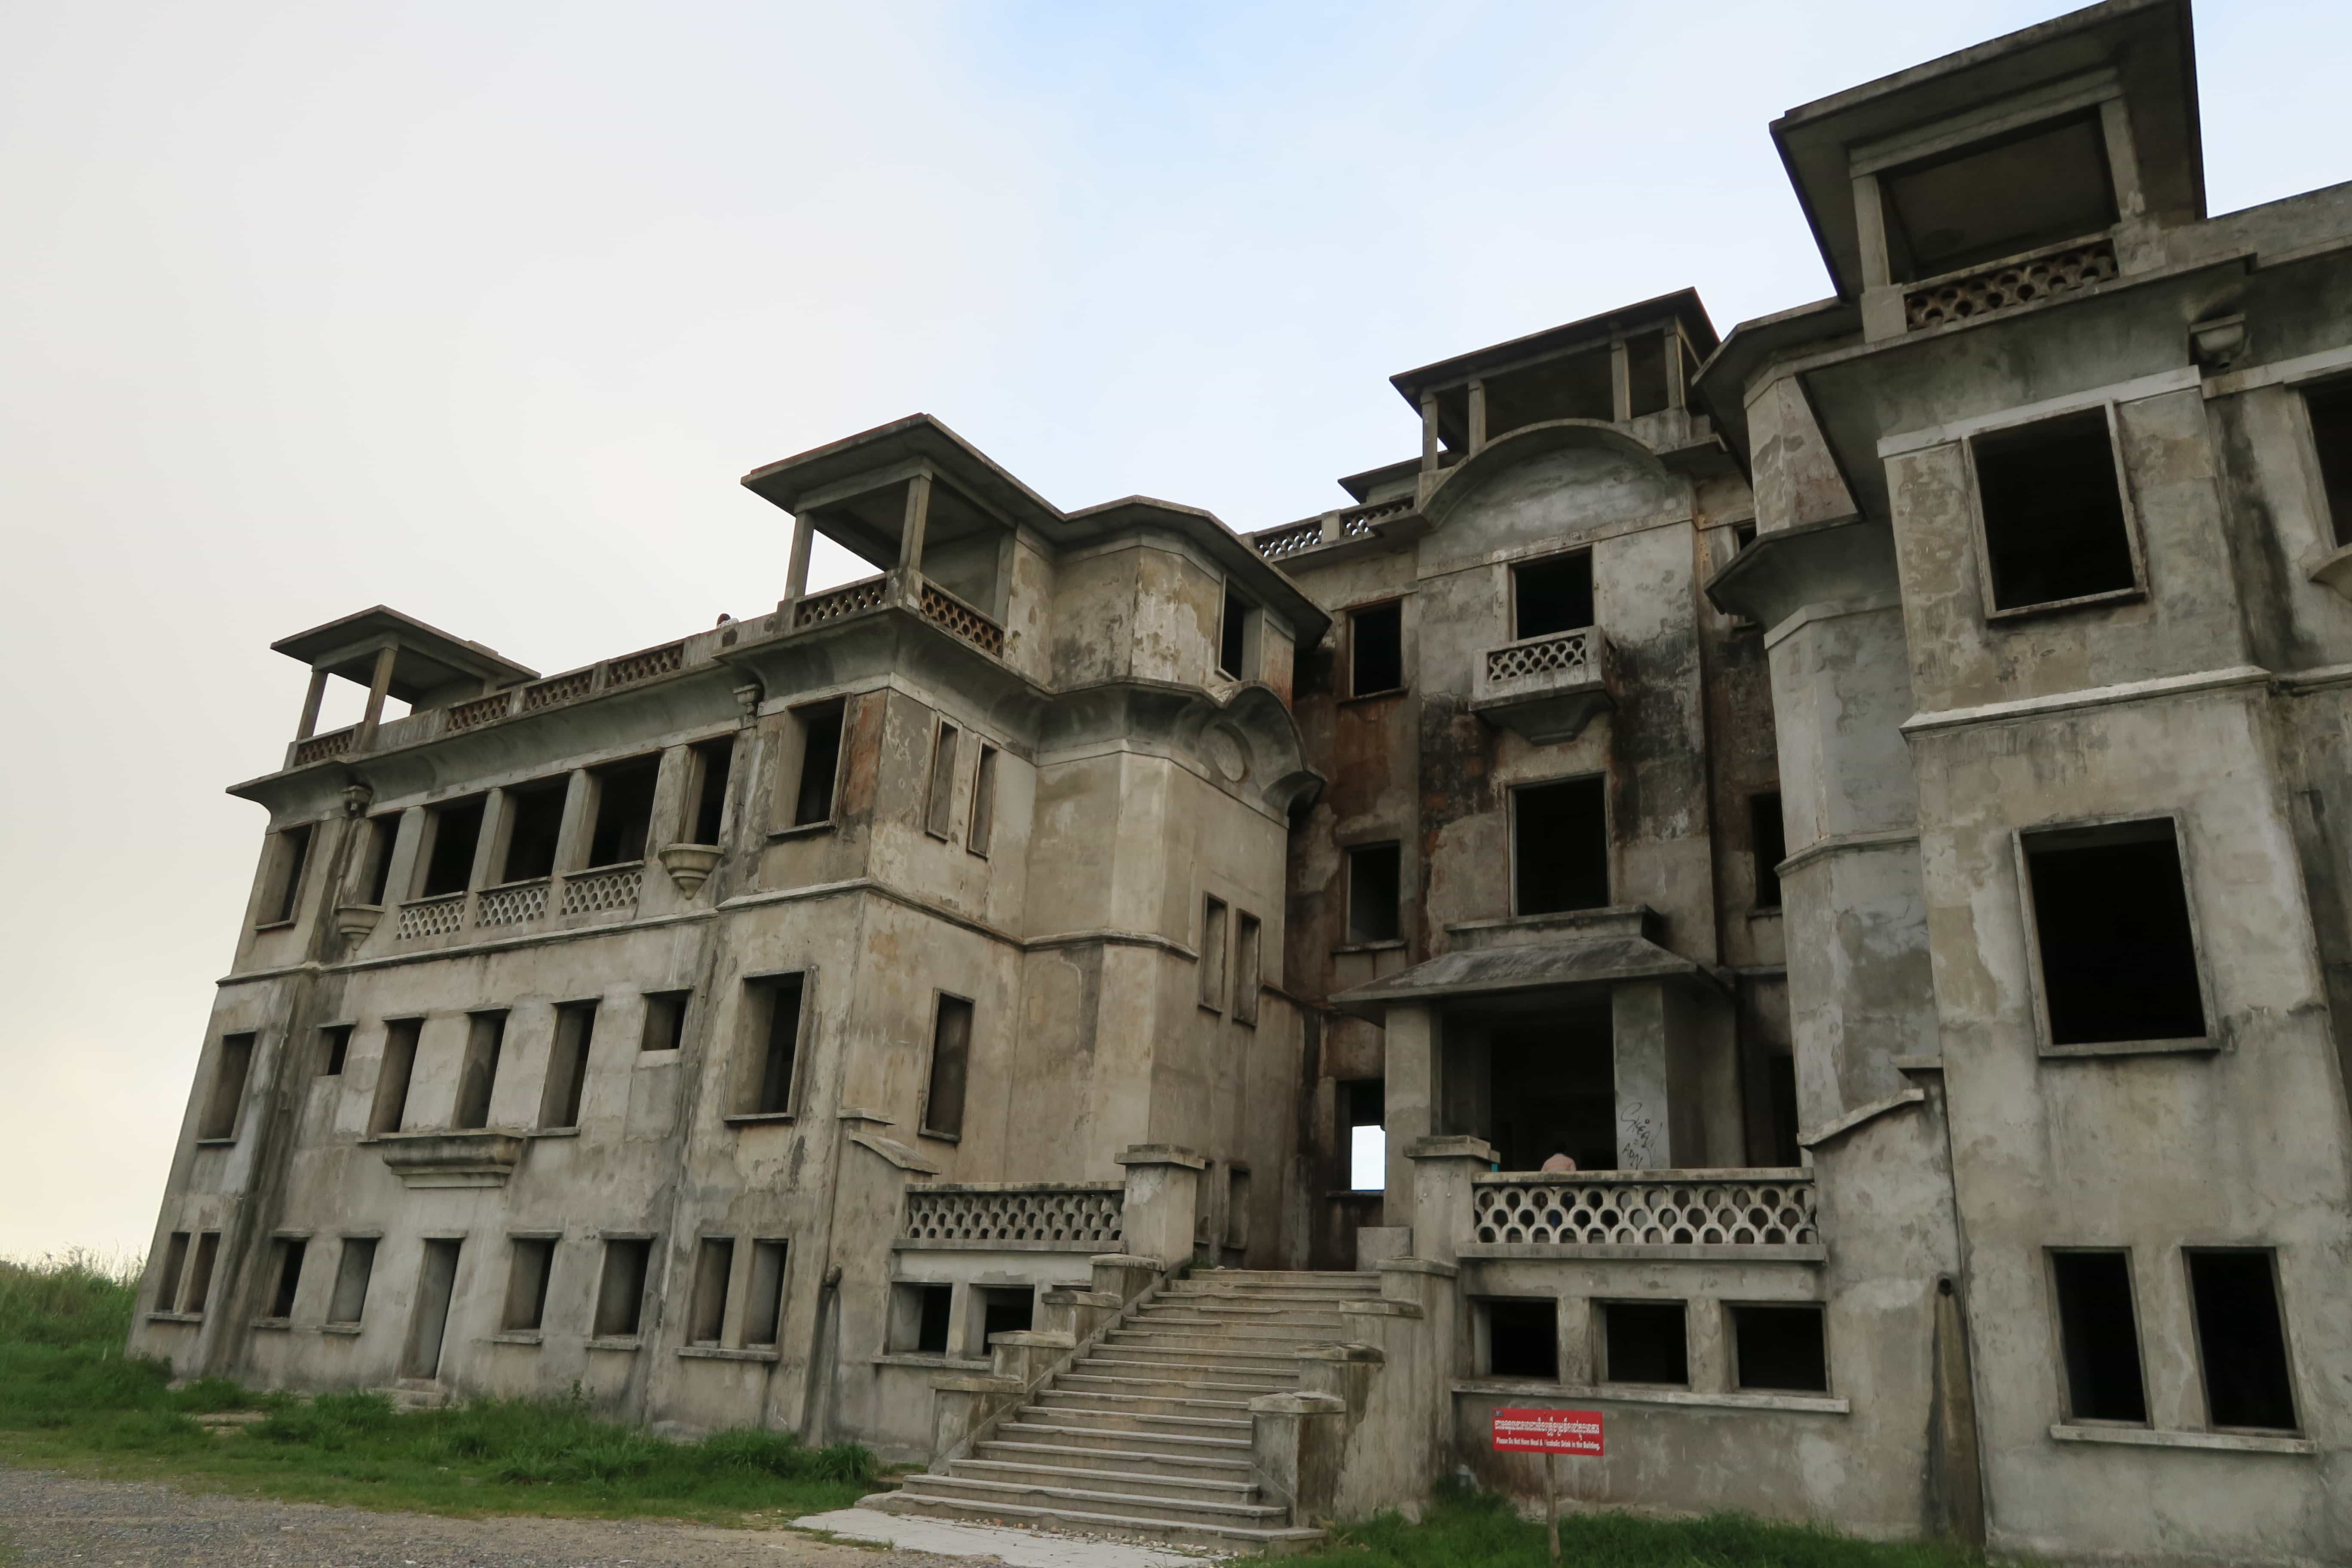 Bokor Hill Station: Is it worth a visit?